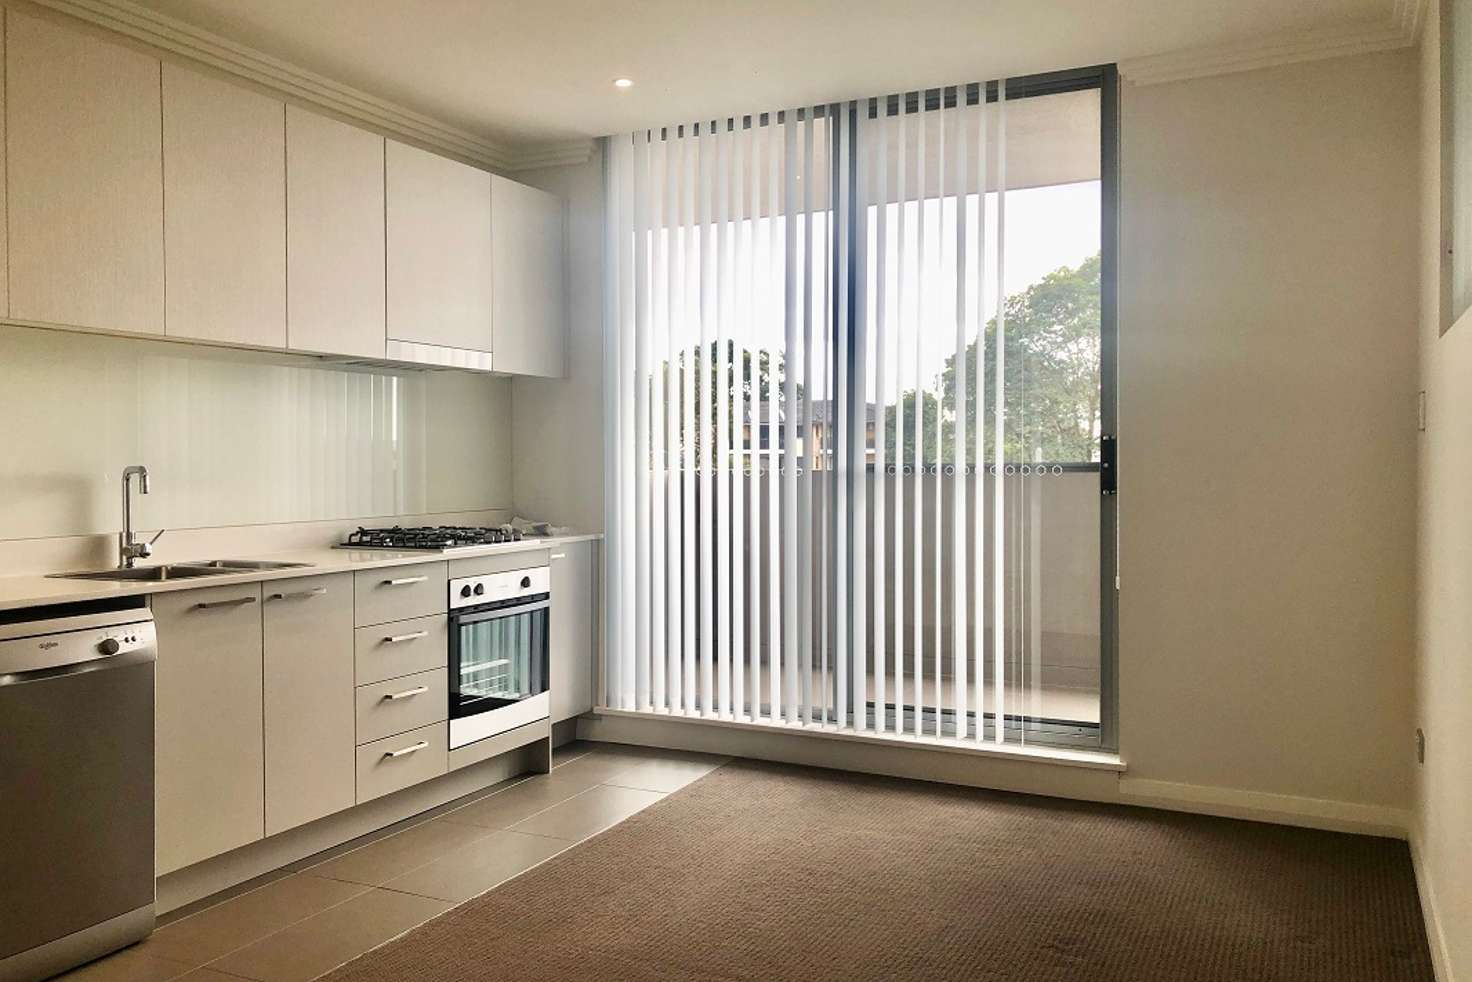 Main view of Homely apartment listing, 78/79-87 Beaconsfield Street, Silverwater NSW 2128